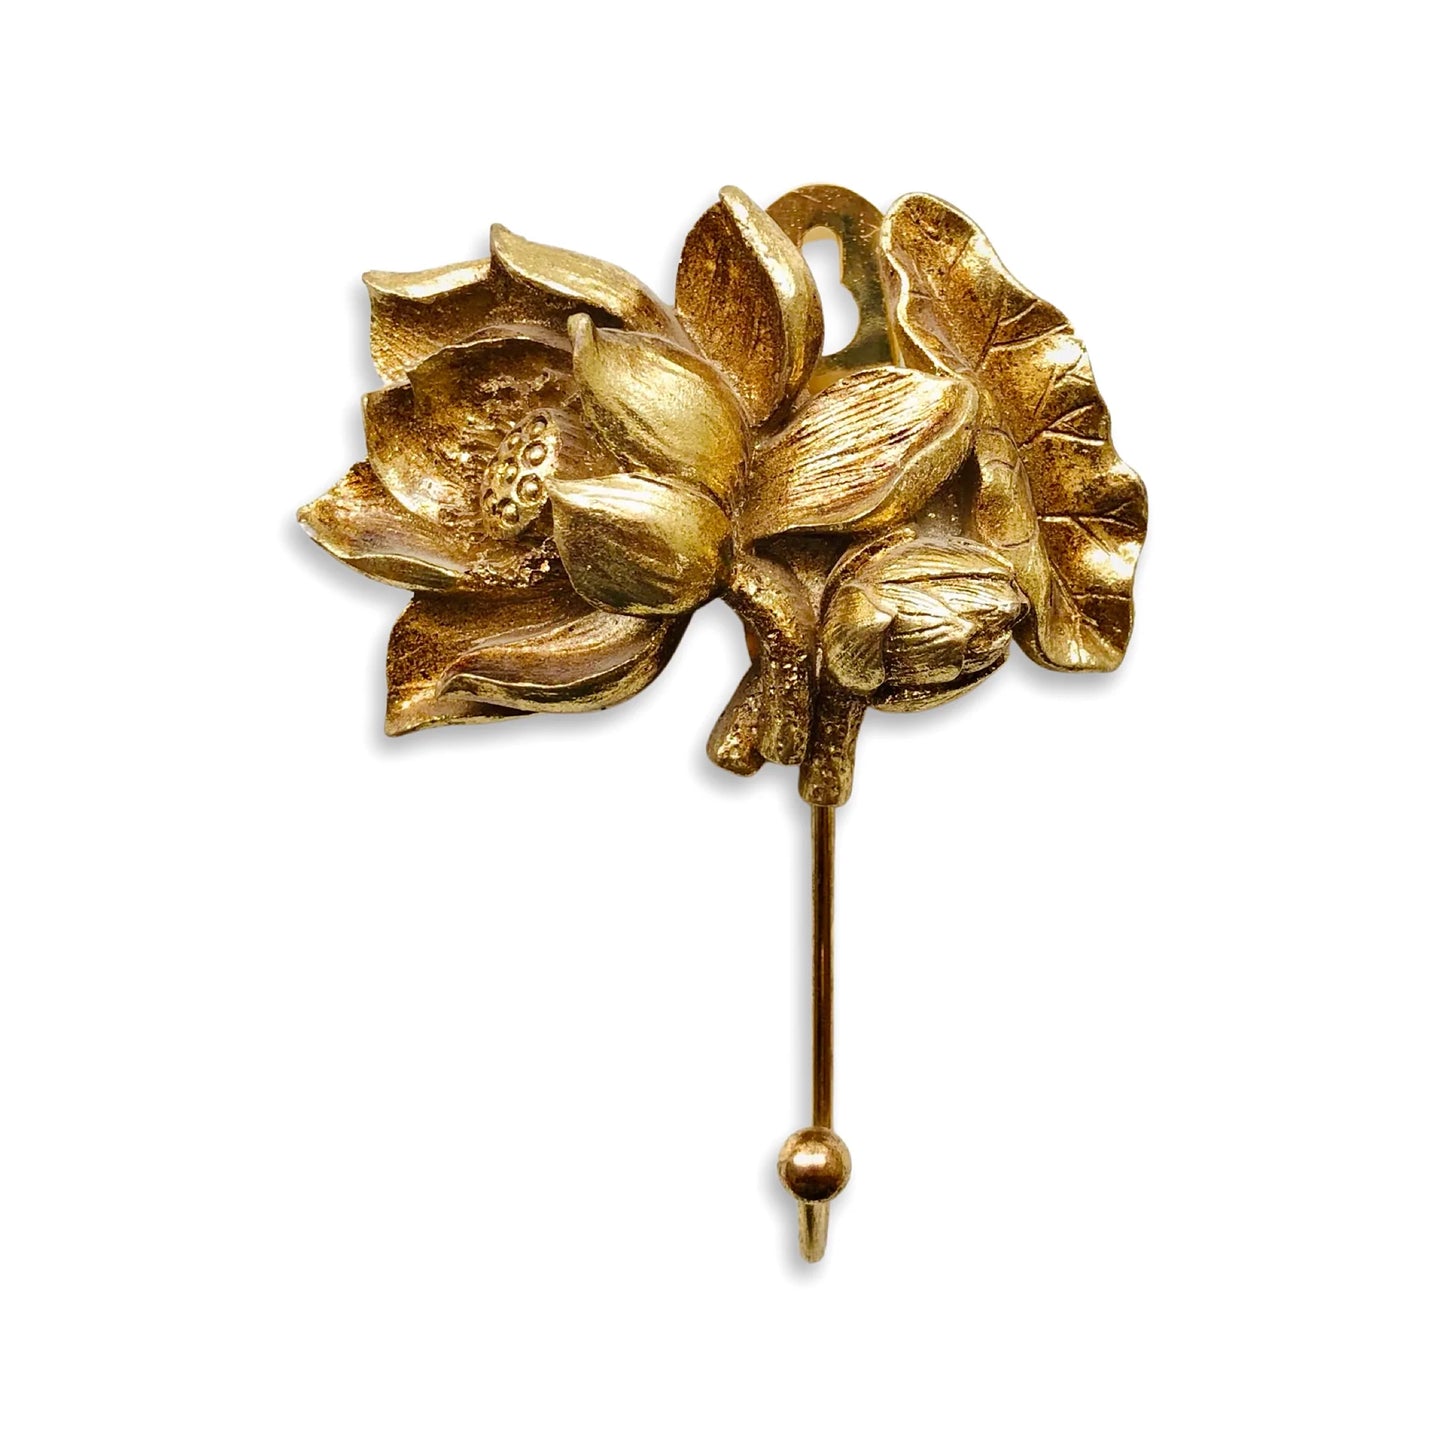 Luxury Flower Shaped Hooks - Available in 3 Designs